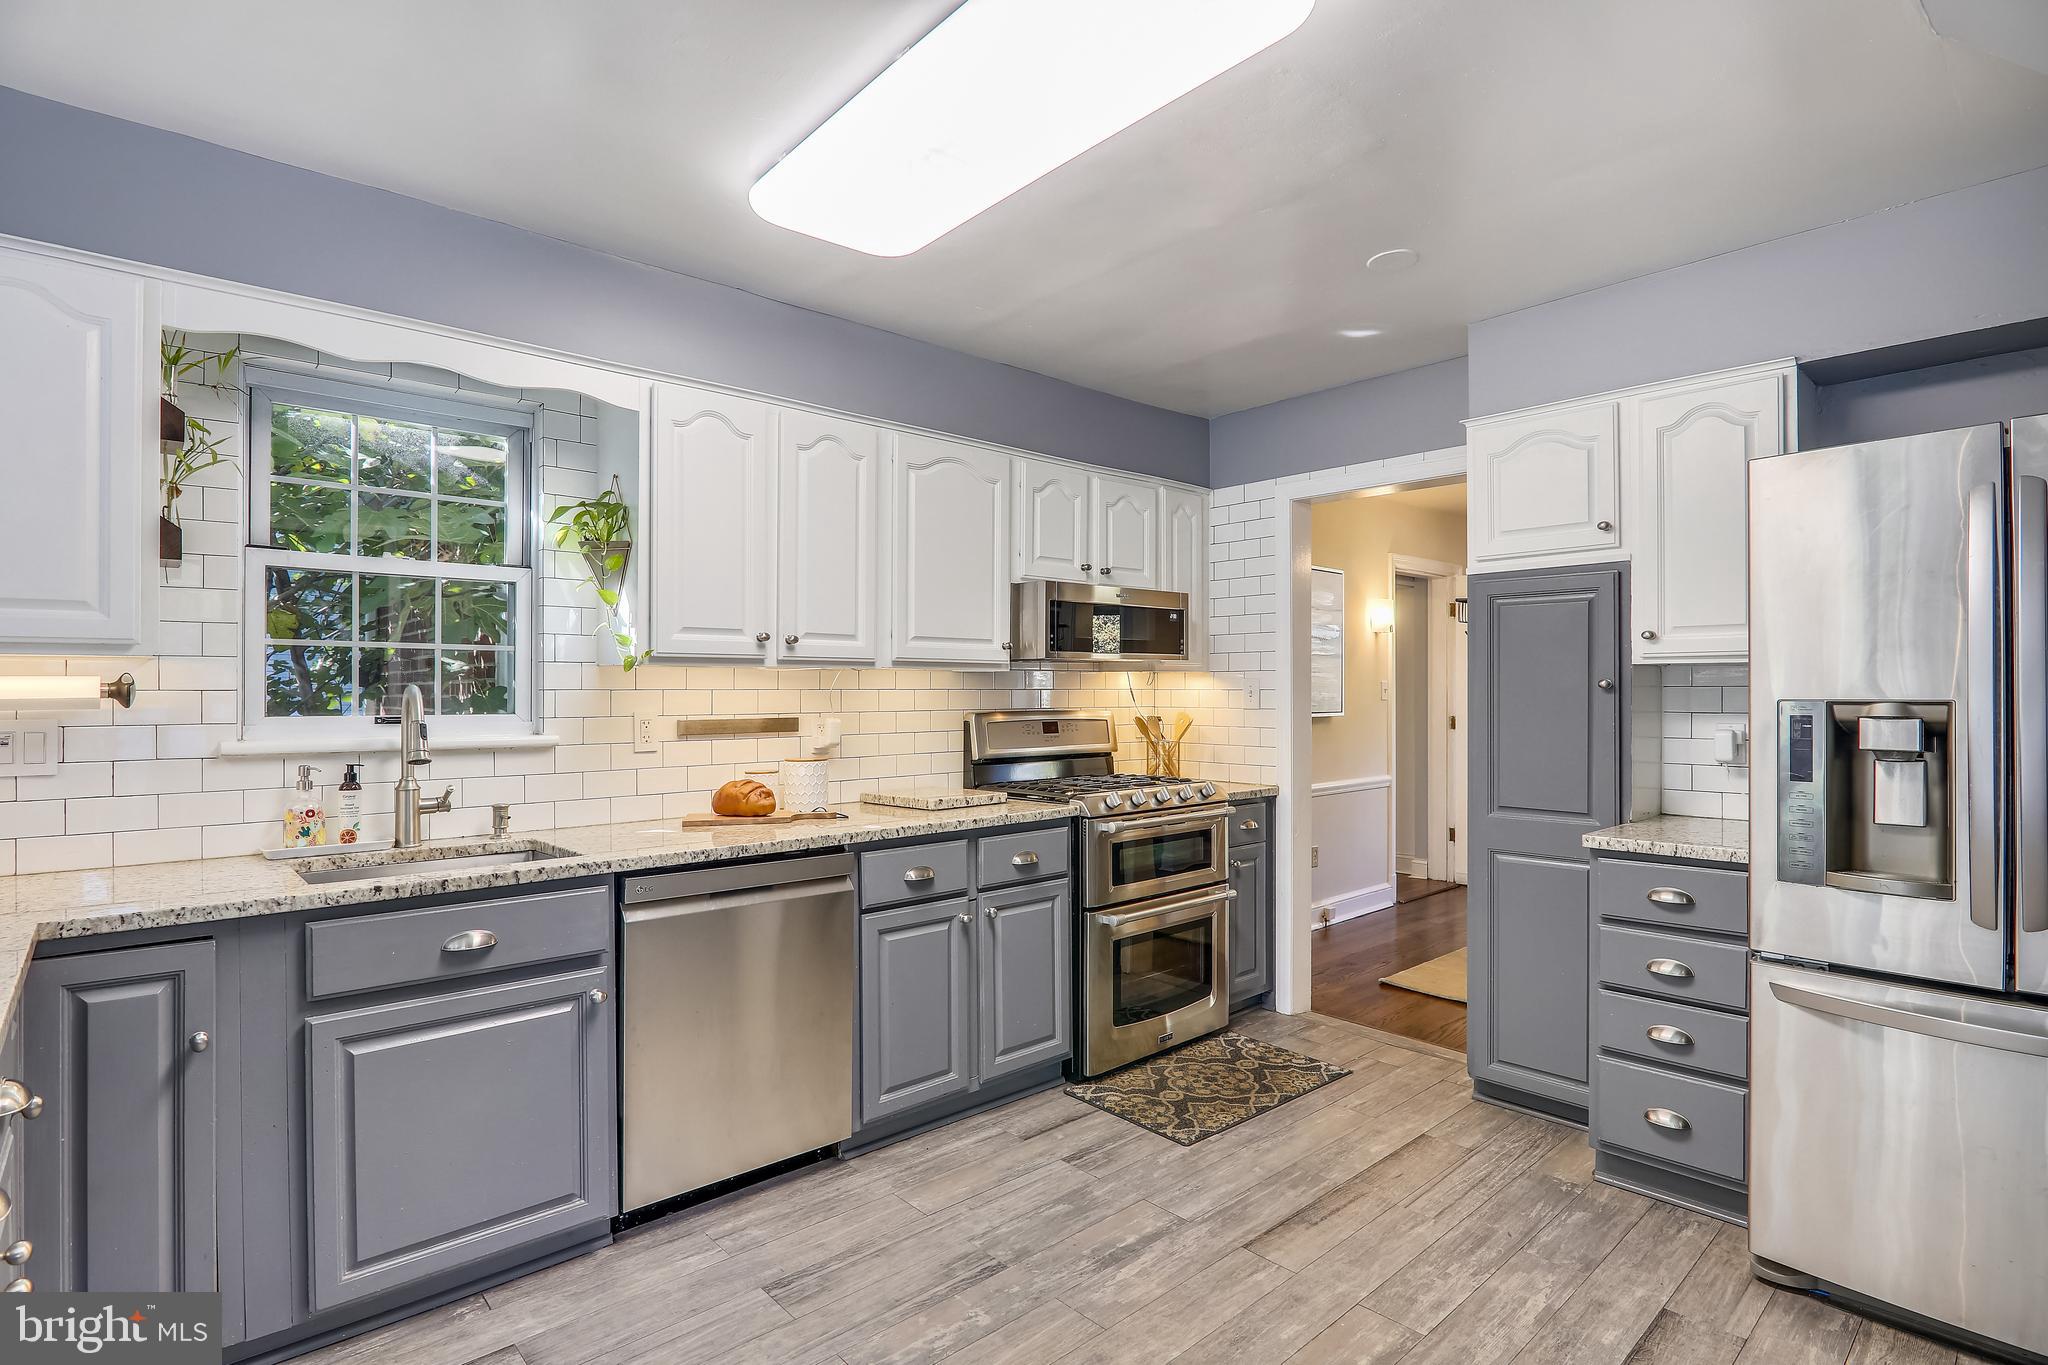 a kitchen with stainless steel appliances granite countertop a refrigerator a sink dishwasher a stove top oven a refrigerator with island and chairs